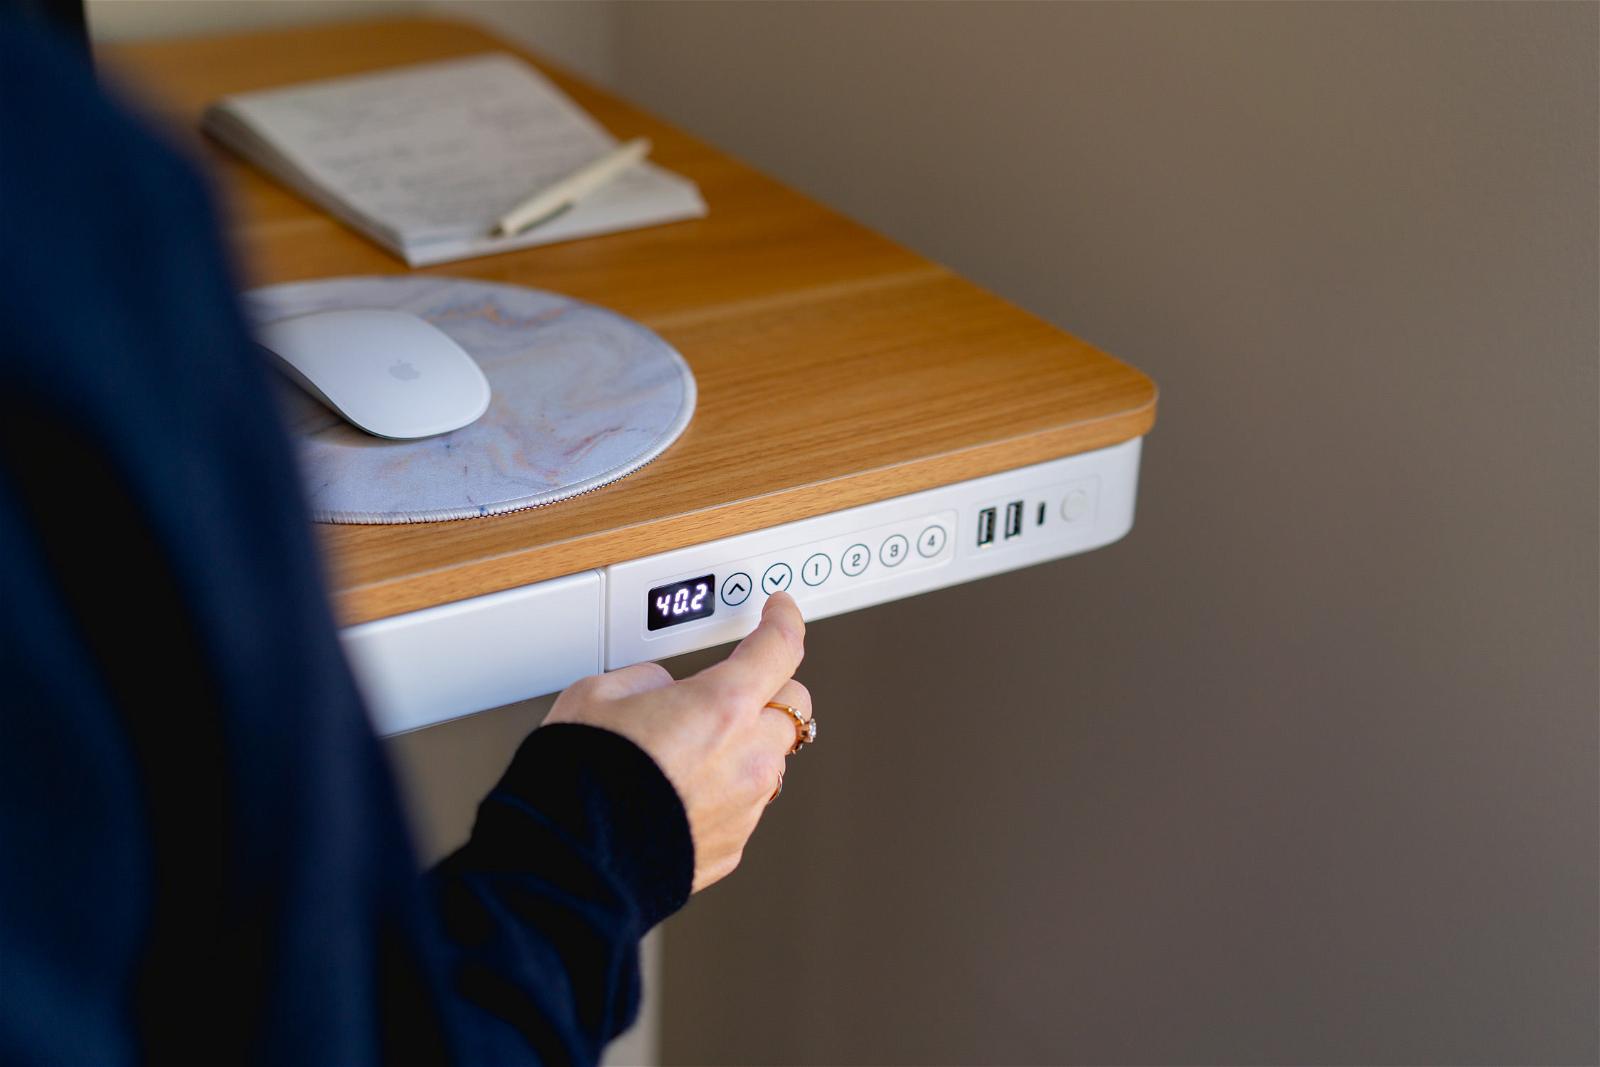 FlexiSpot Comhar All-in-One Standing Desk Review: Worth it?